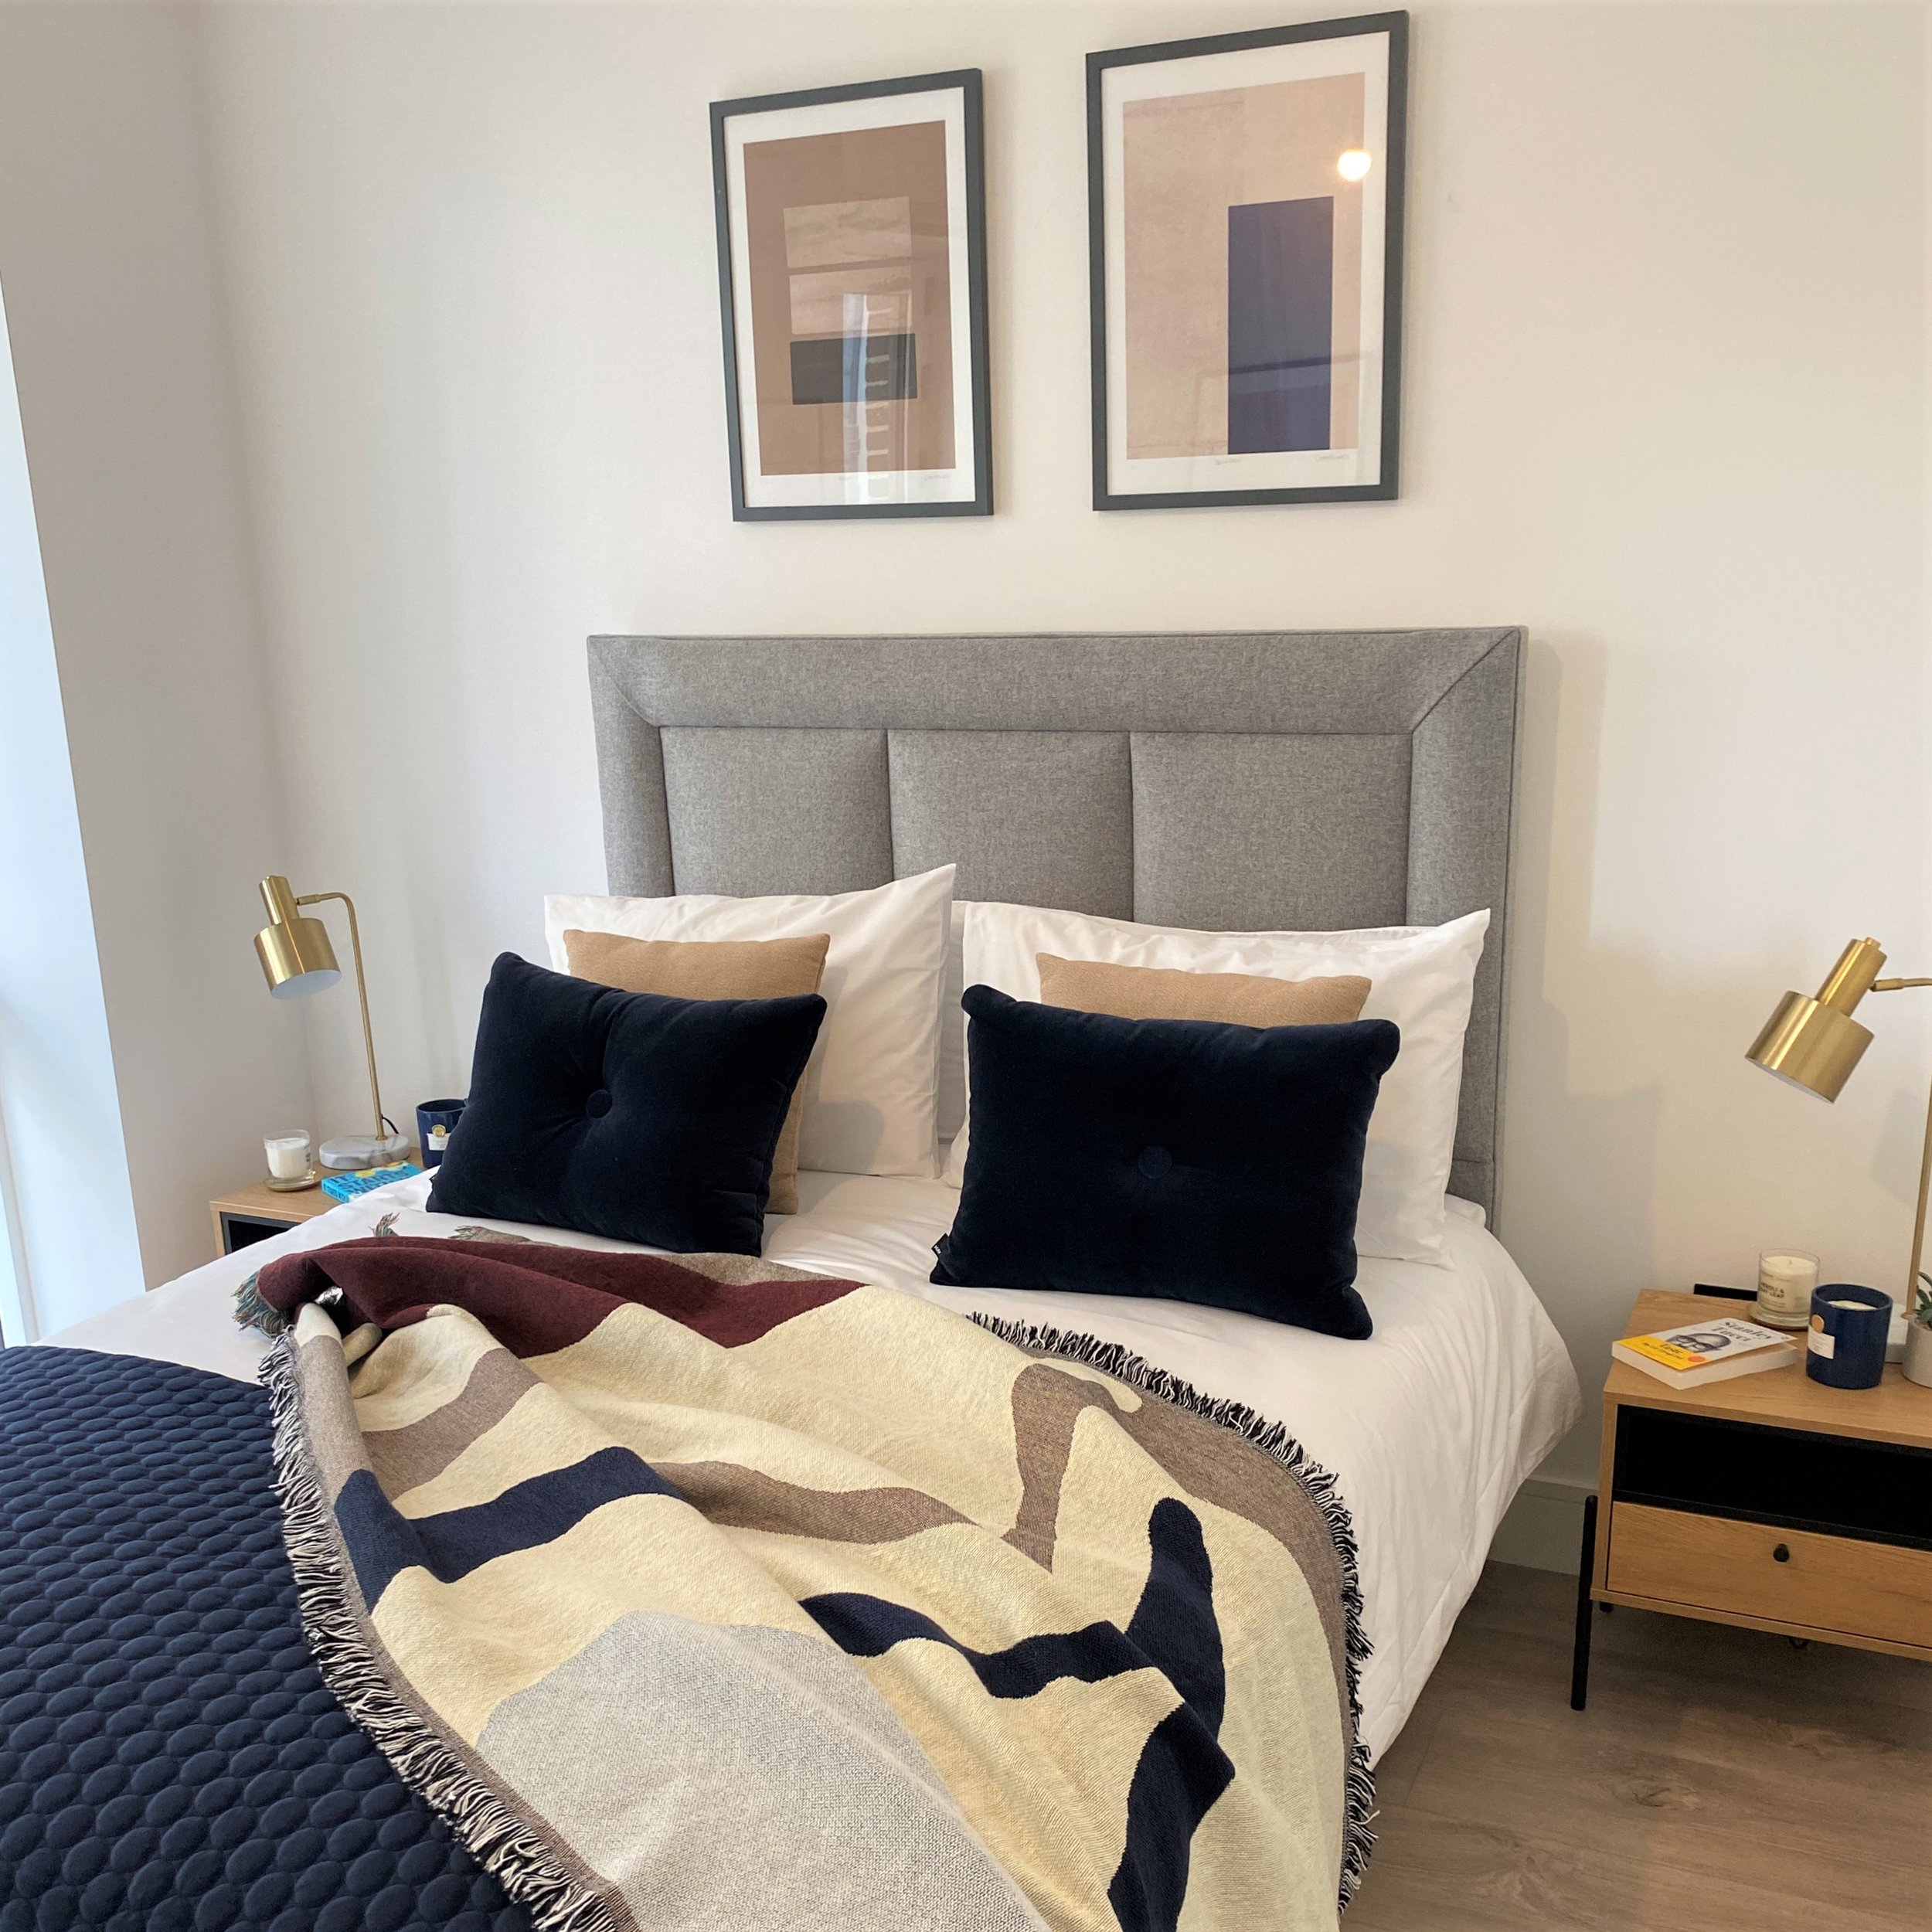 PRS Scheme Dublin, Interior fit-out and showhome, Apartment in Dublin for Large PRS Private Rental Sector Scheme. Contemporary apartment Dublin